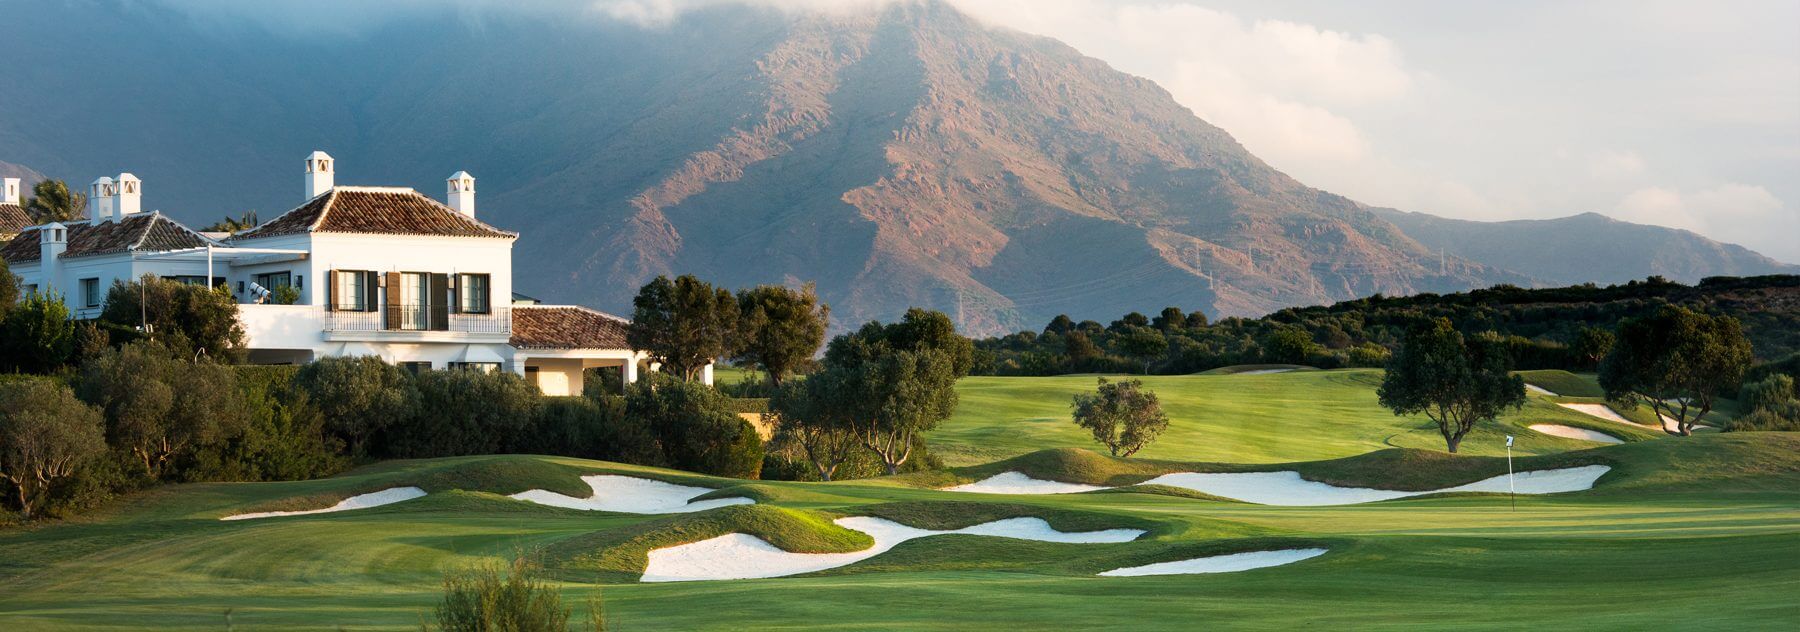 Finca Cortesin fairways and clubhouse with misty mountains in Spain